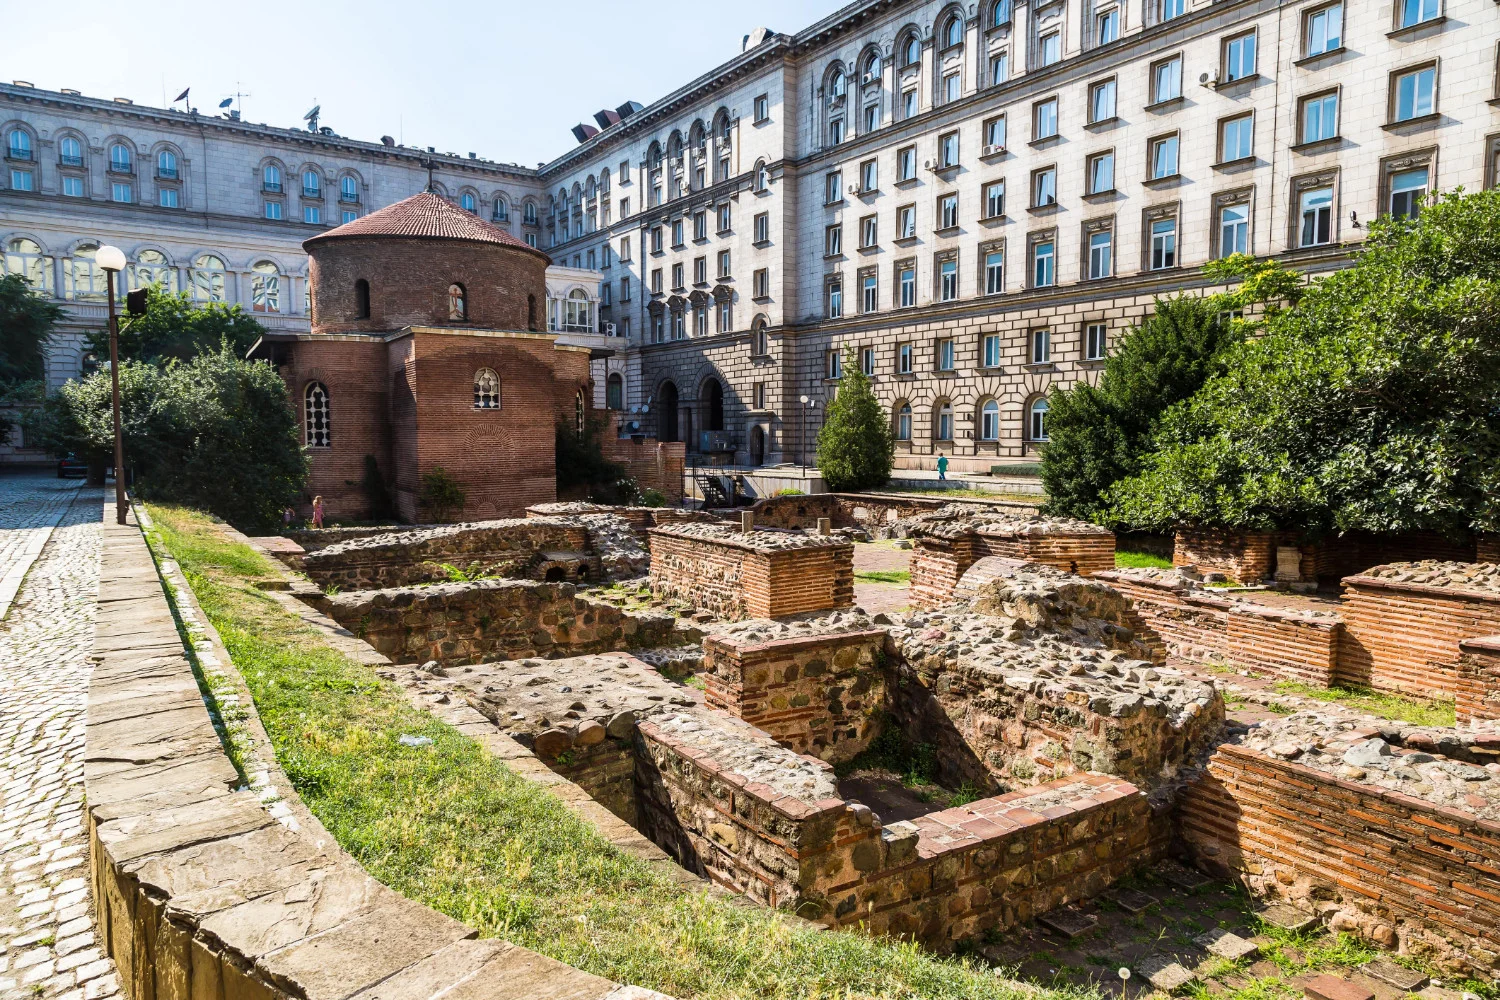 Roman Rotunda of St. George - the oldest preserved building in Sofia.  The original site housed Roman baths, evidence of which are still seen in the nearby ruins.  